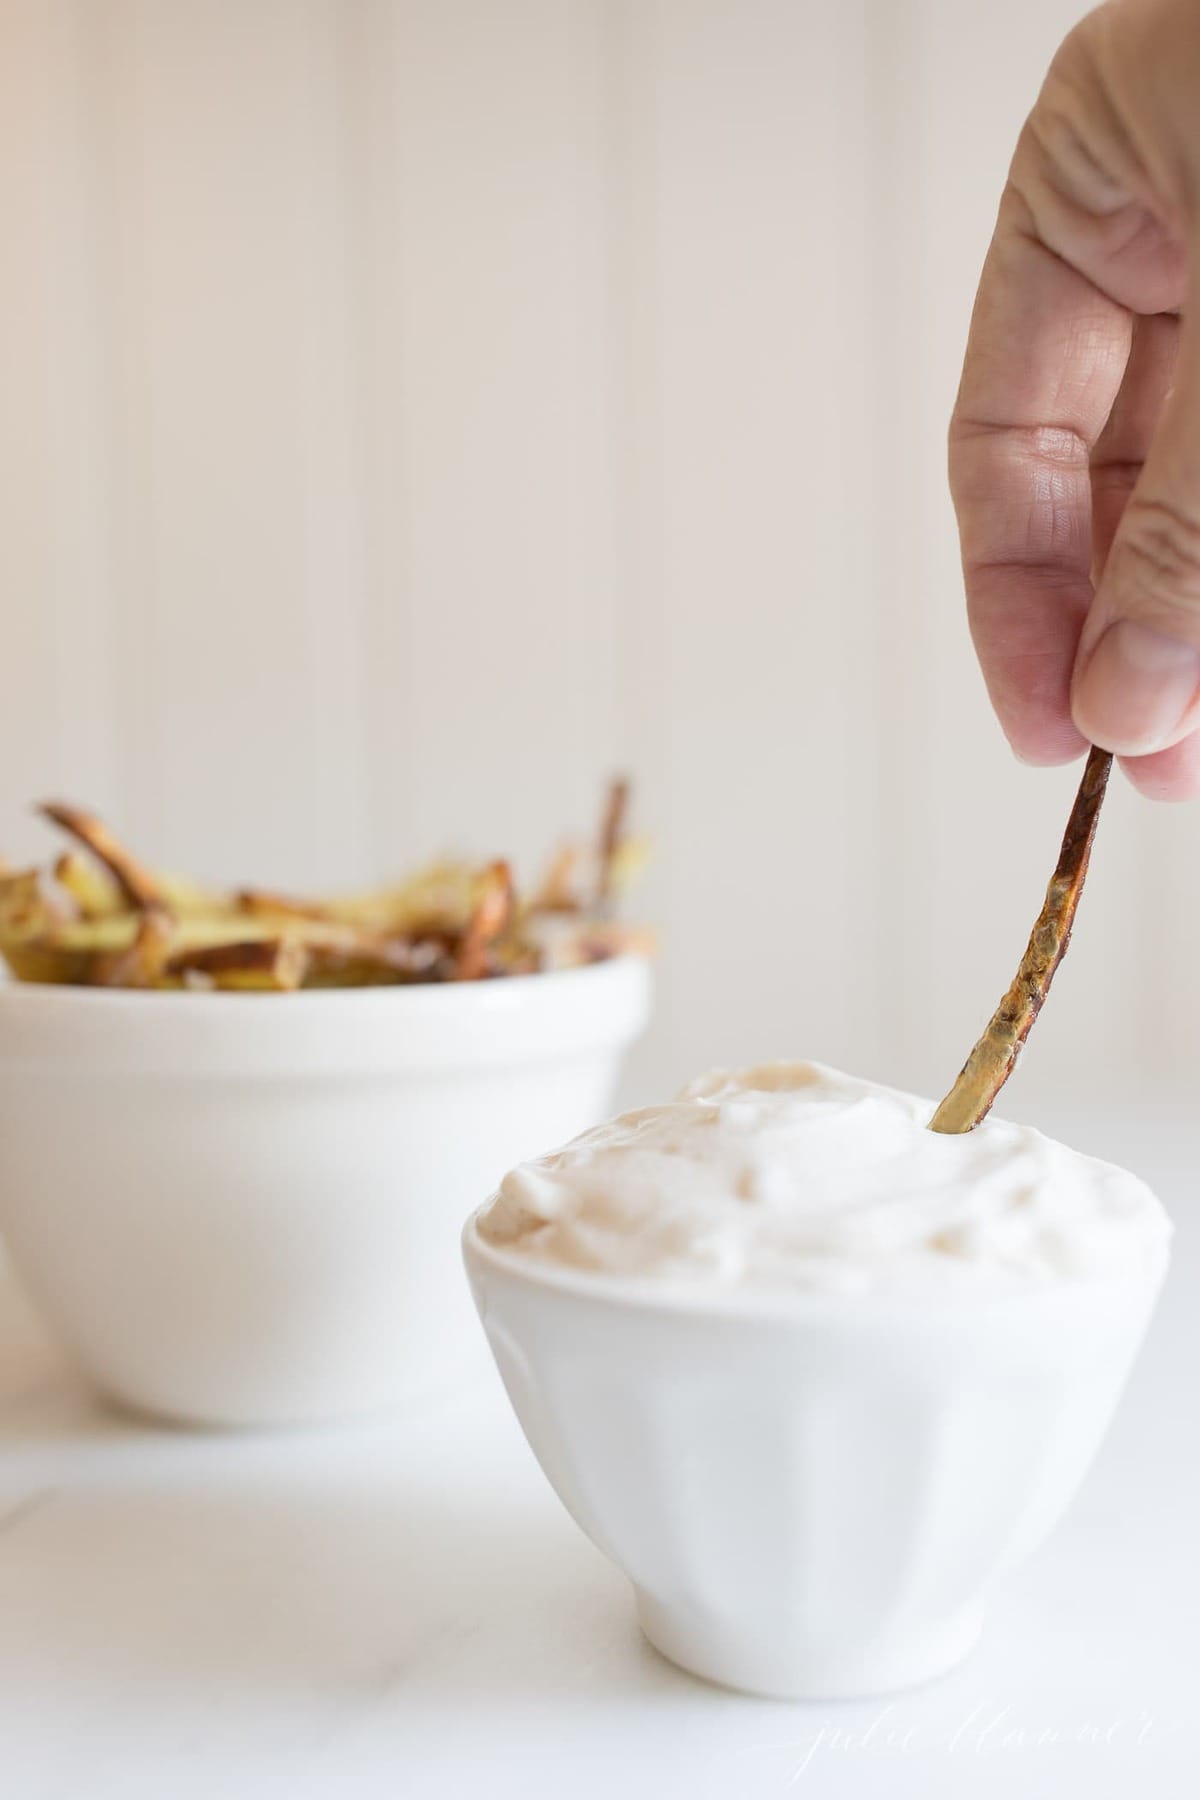 truffle aioli in a white bowl, hand dipping a french fry into bowl